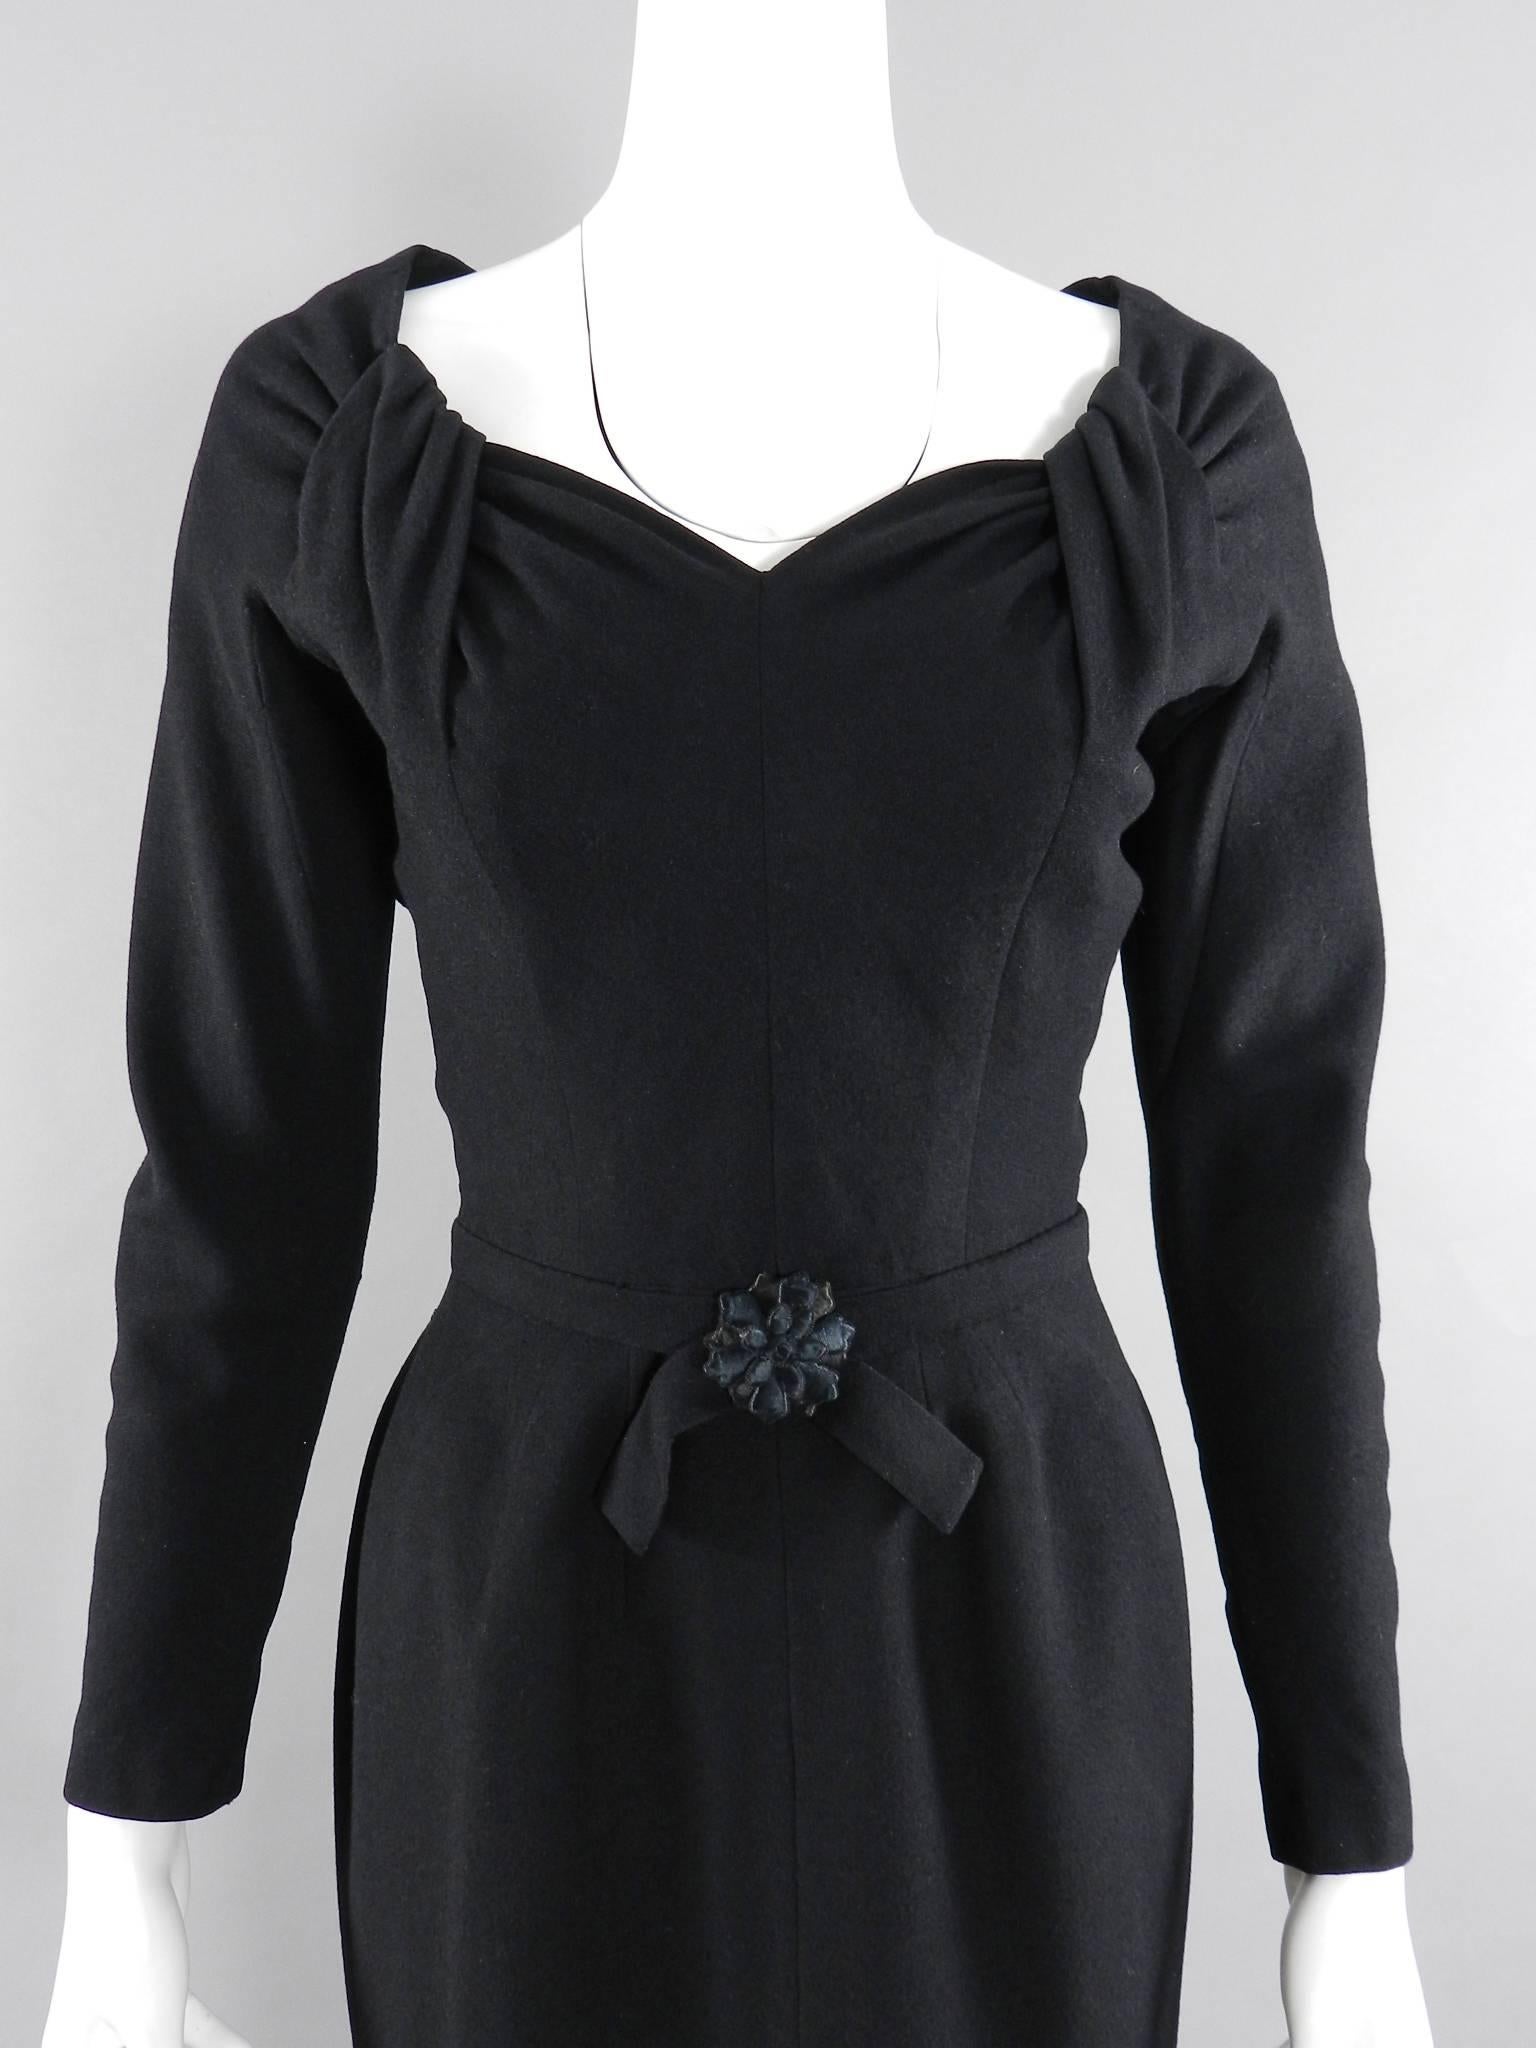 Jacques Fath 1950's Black Wool Dress and Jacket Suit 2